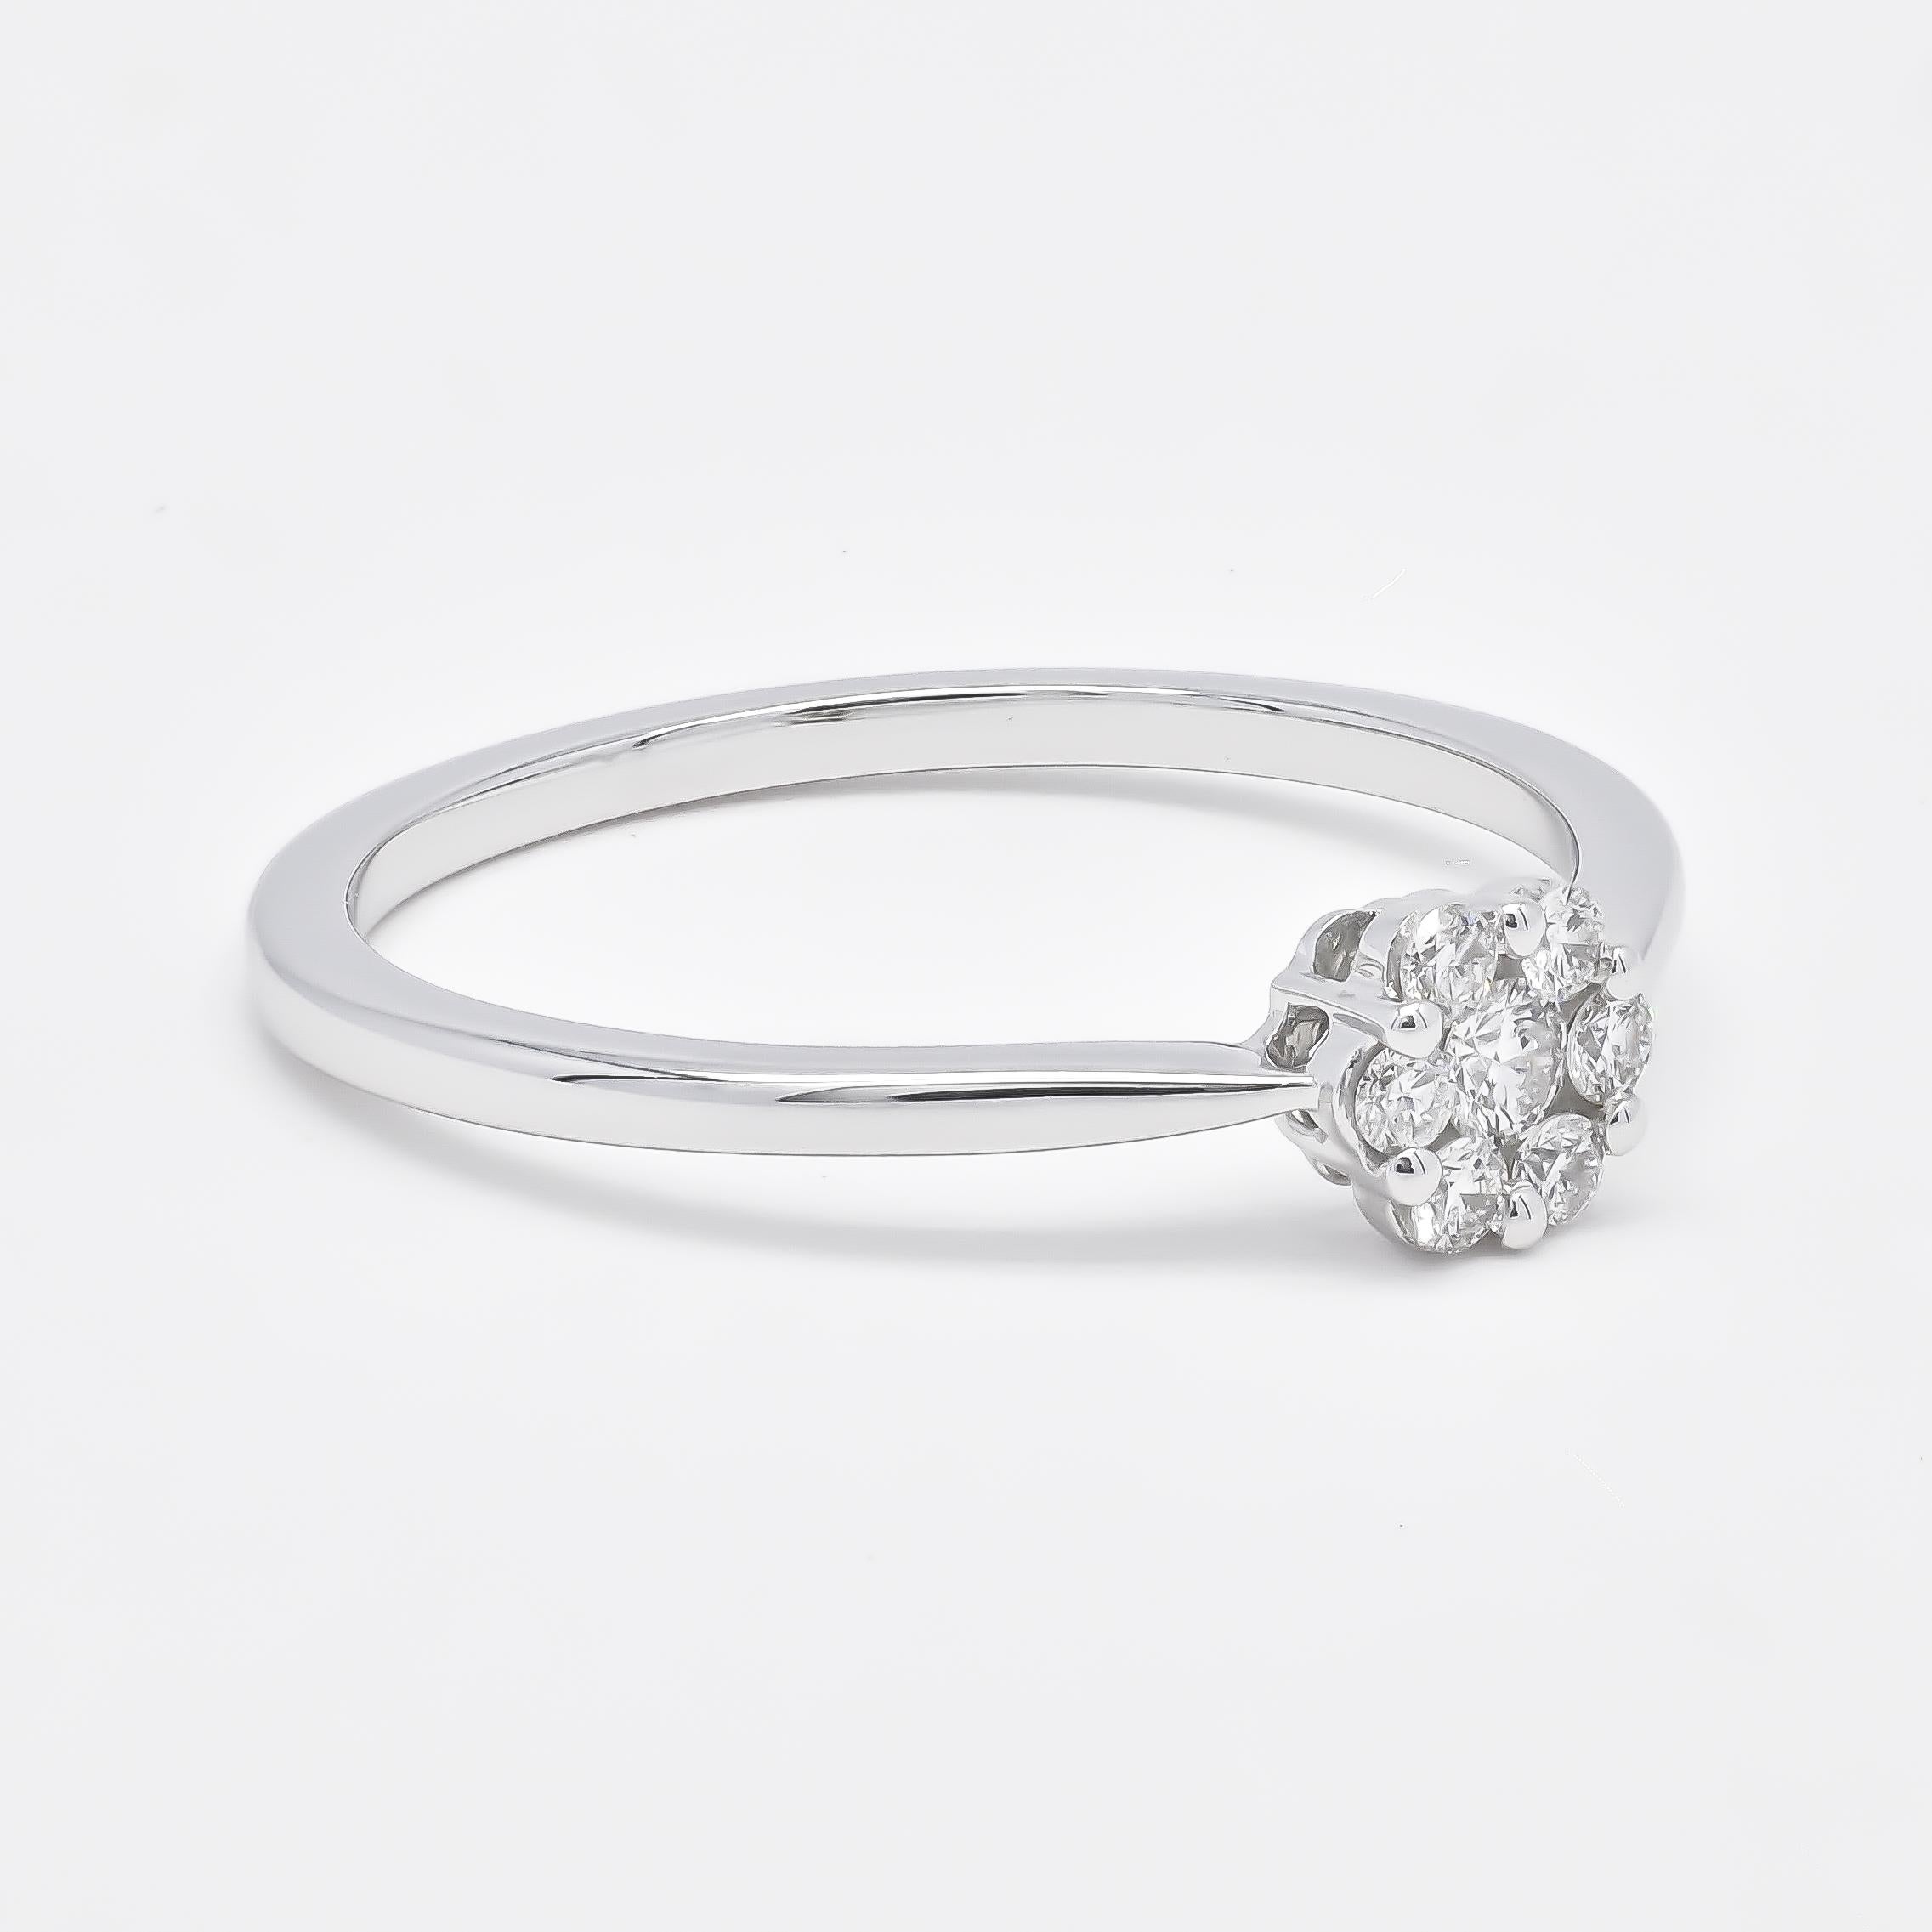 Minimalist simple cluster set diamond white ring perfect for everyday wear or a gifting item!


Metal: 18kt White Gold 
Gemstone: Natural Diamonds
Shape: Round Brilliant
Total Carat Weight: 0.26ct
Number of Gemstones: 7
Setting Style: